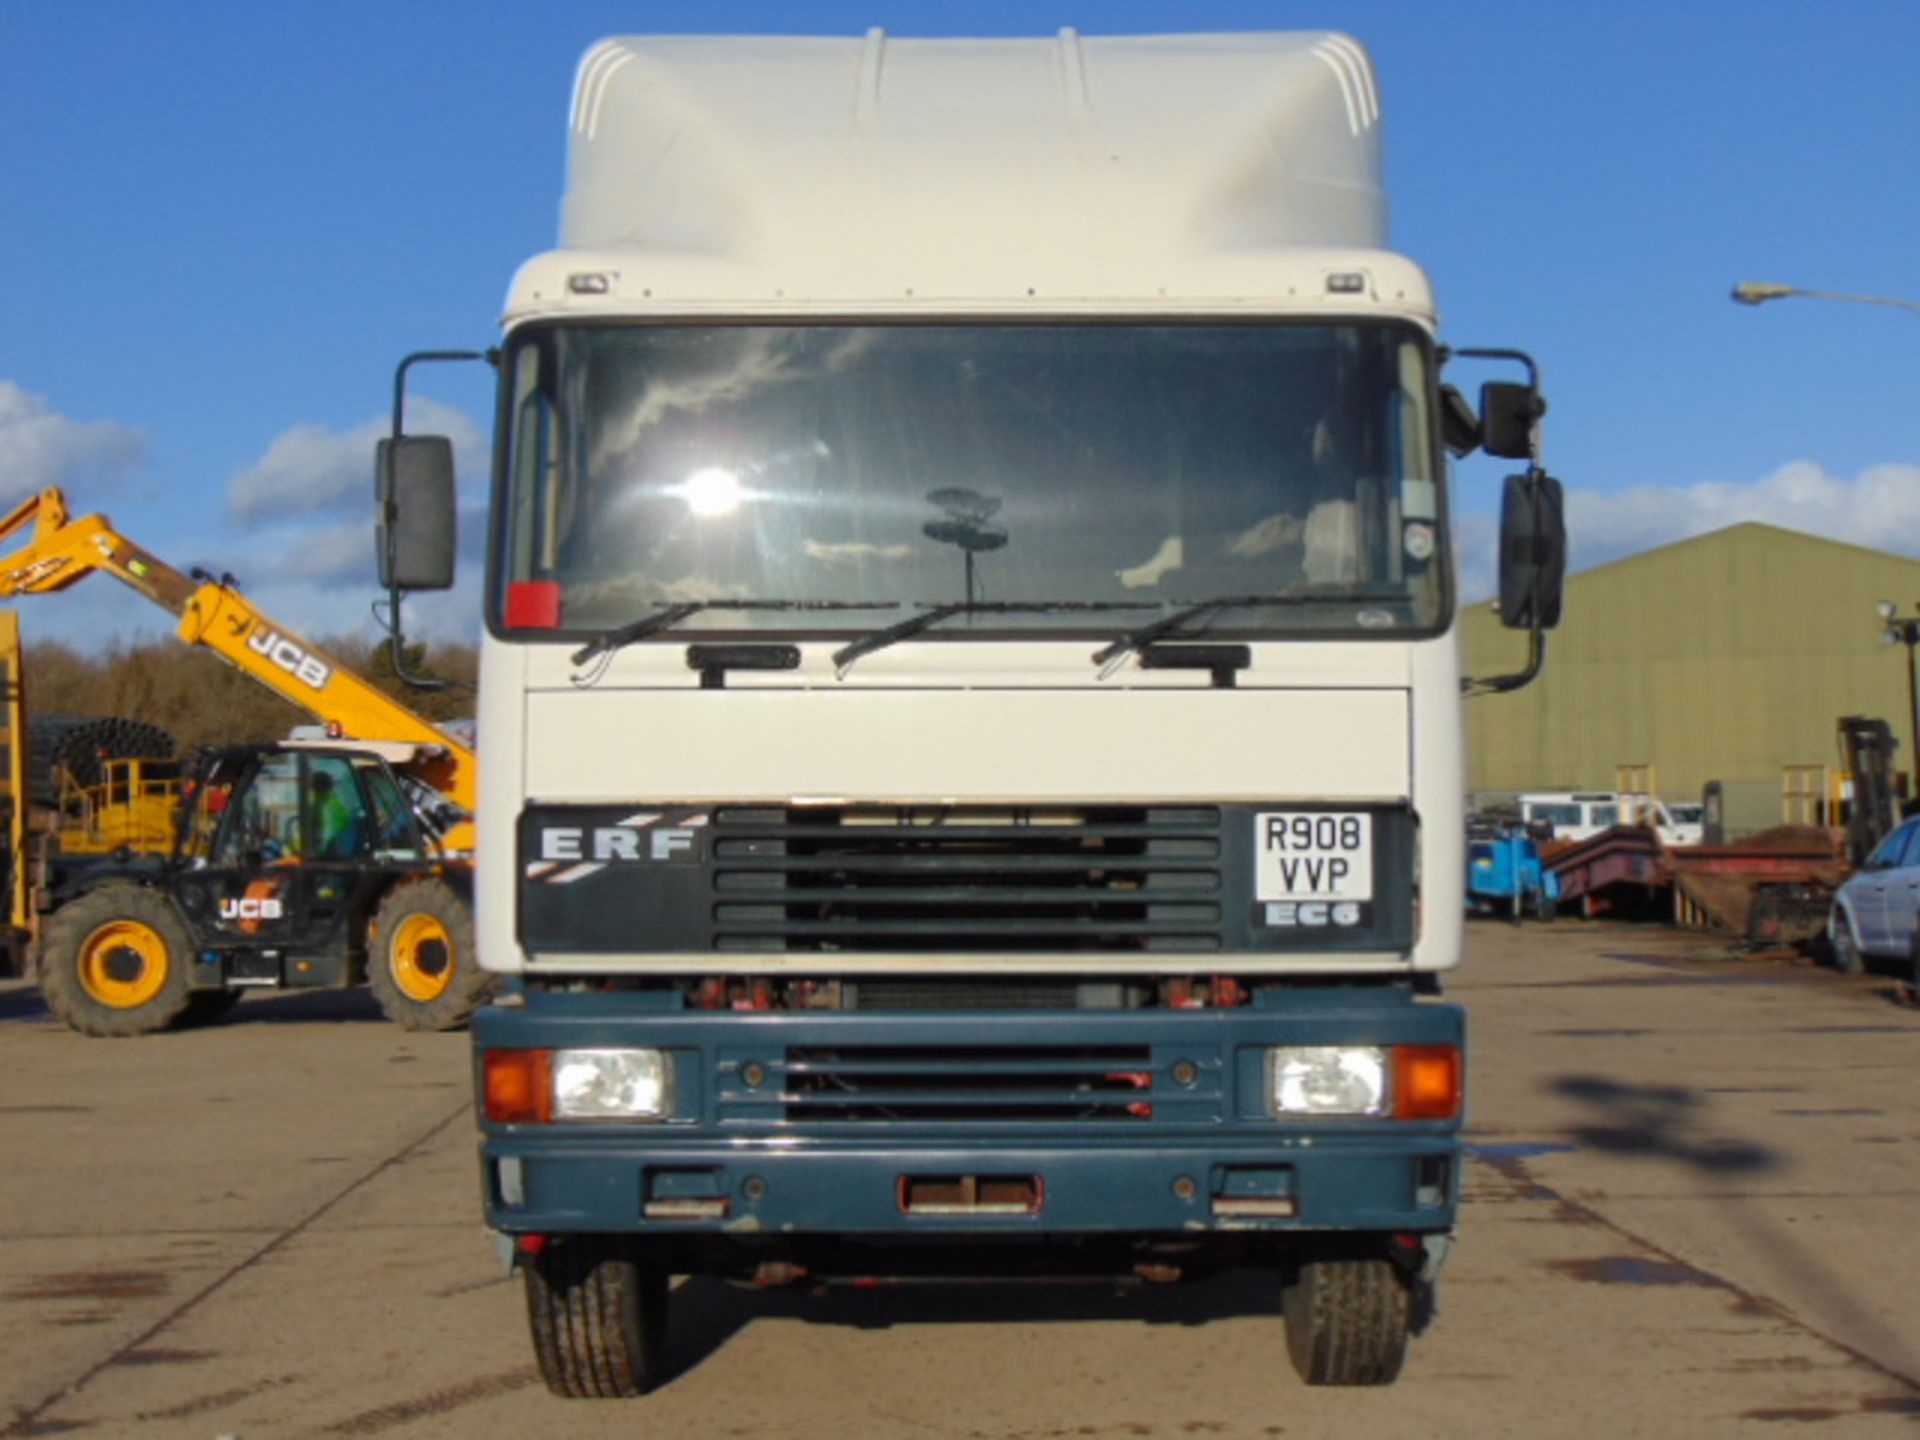 1998 ERF EC6.23 RD2 4x2 Flatbed Truck - Image 2 of 22